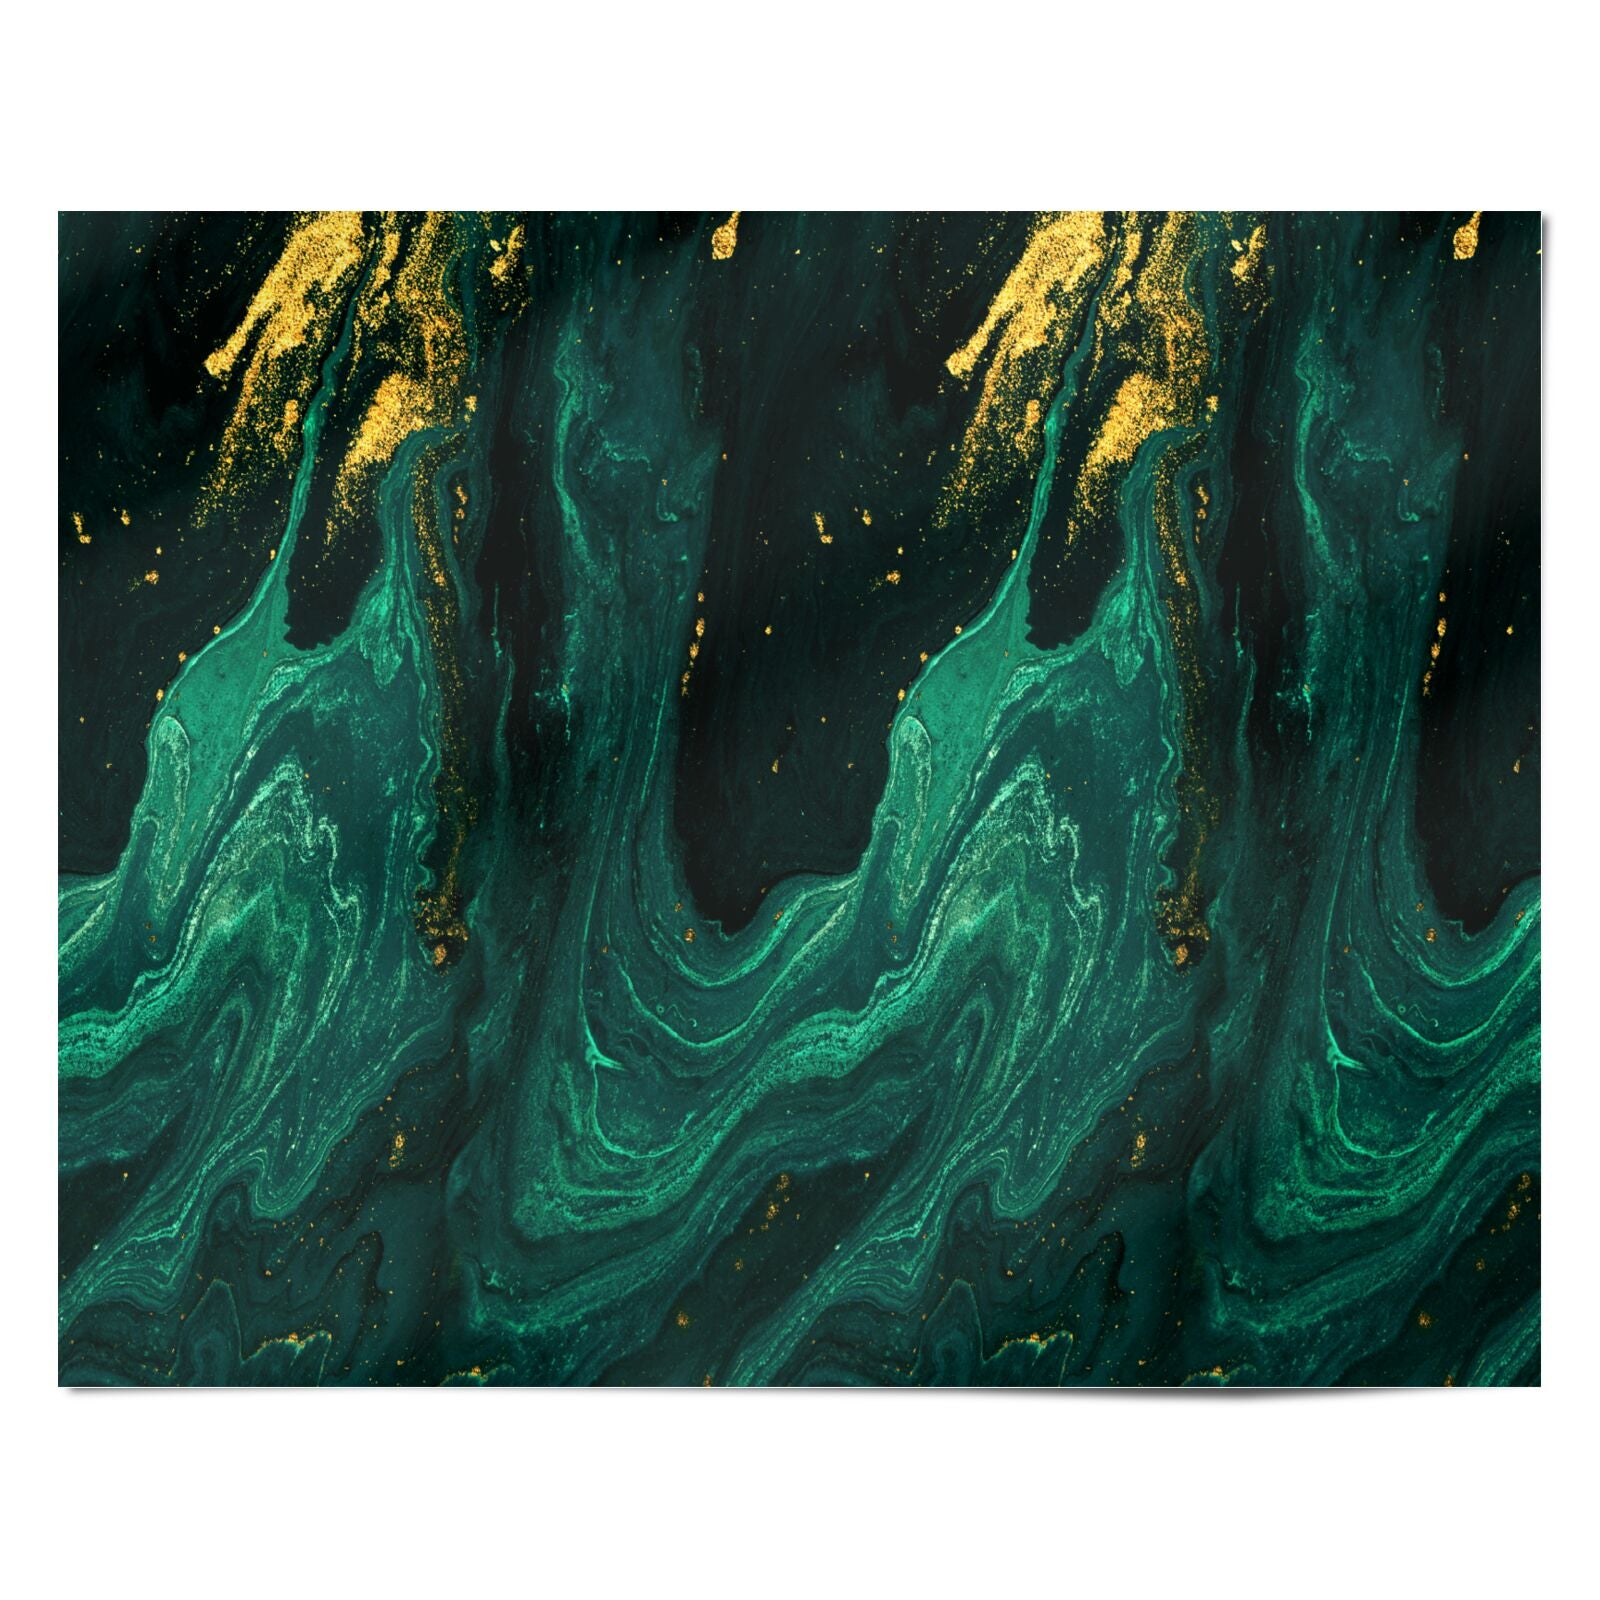 Emerald Green Wrapping Paper